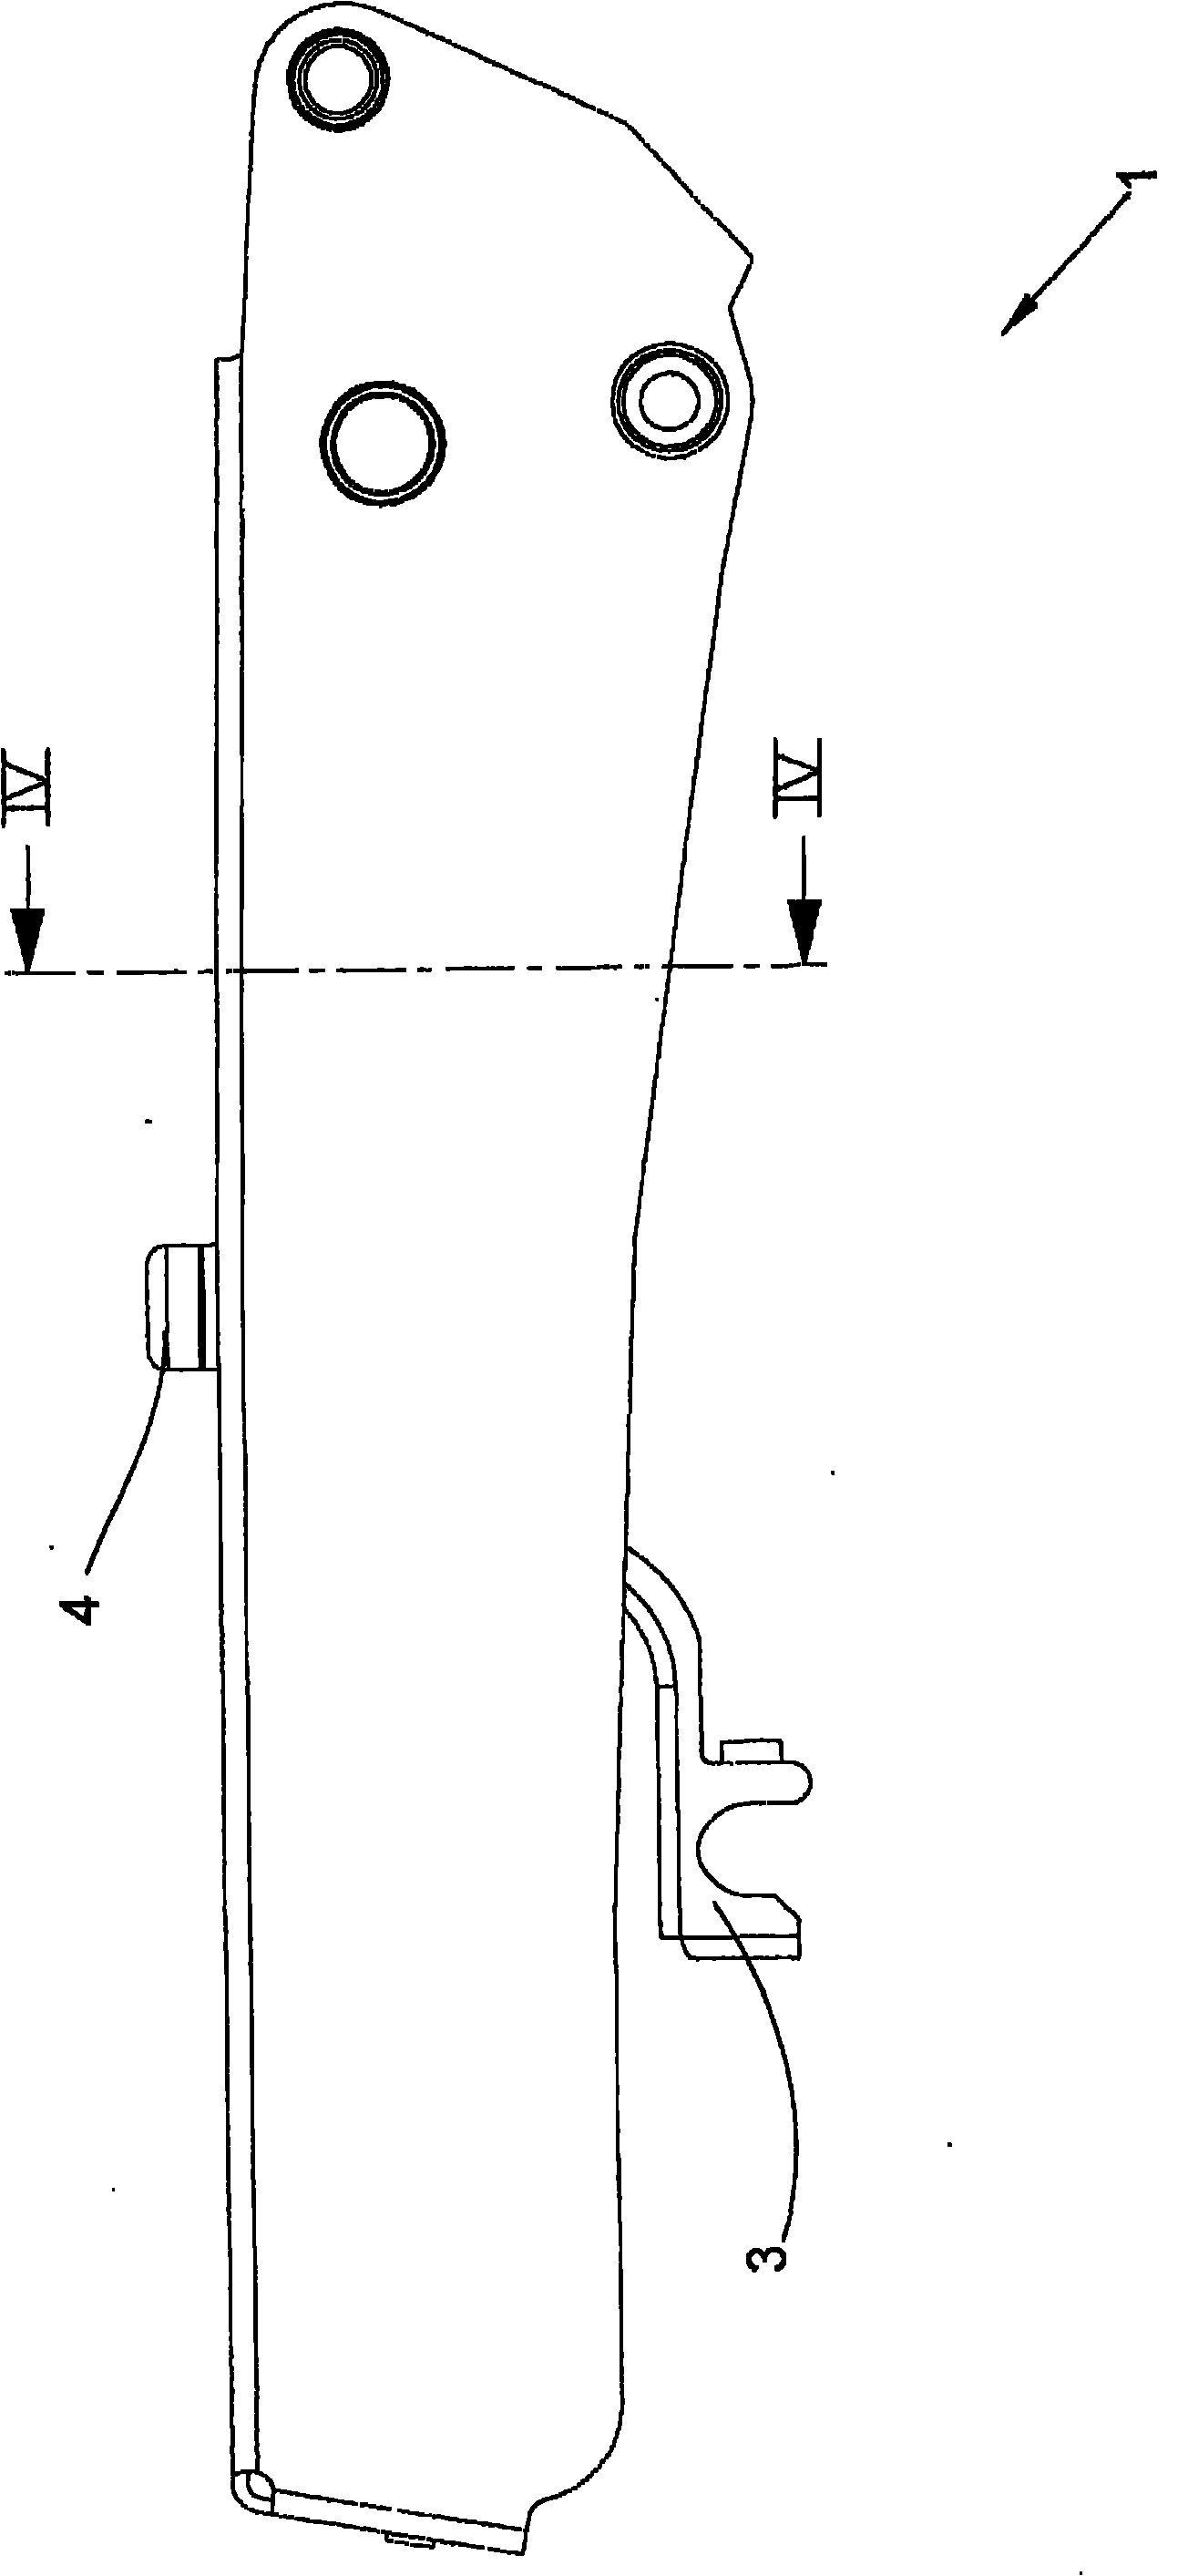 Upper cylinder carrying and load arm for a stretching unit